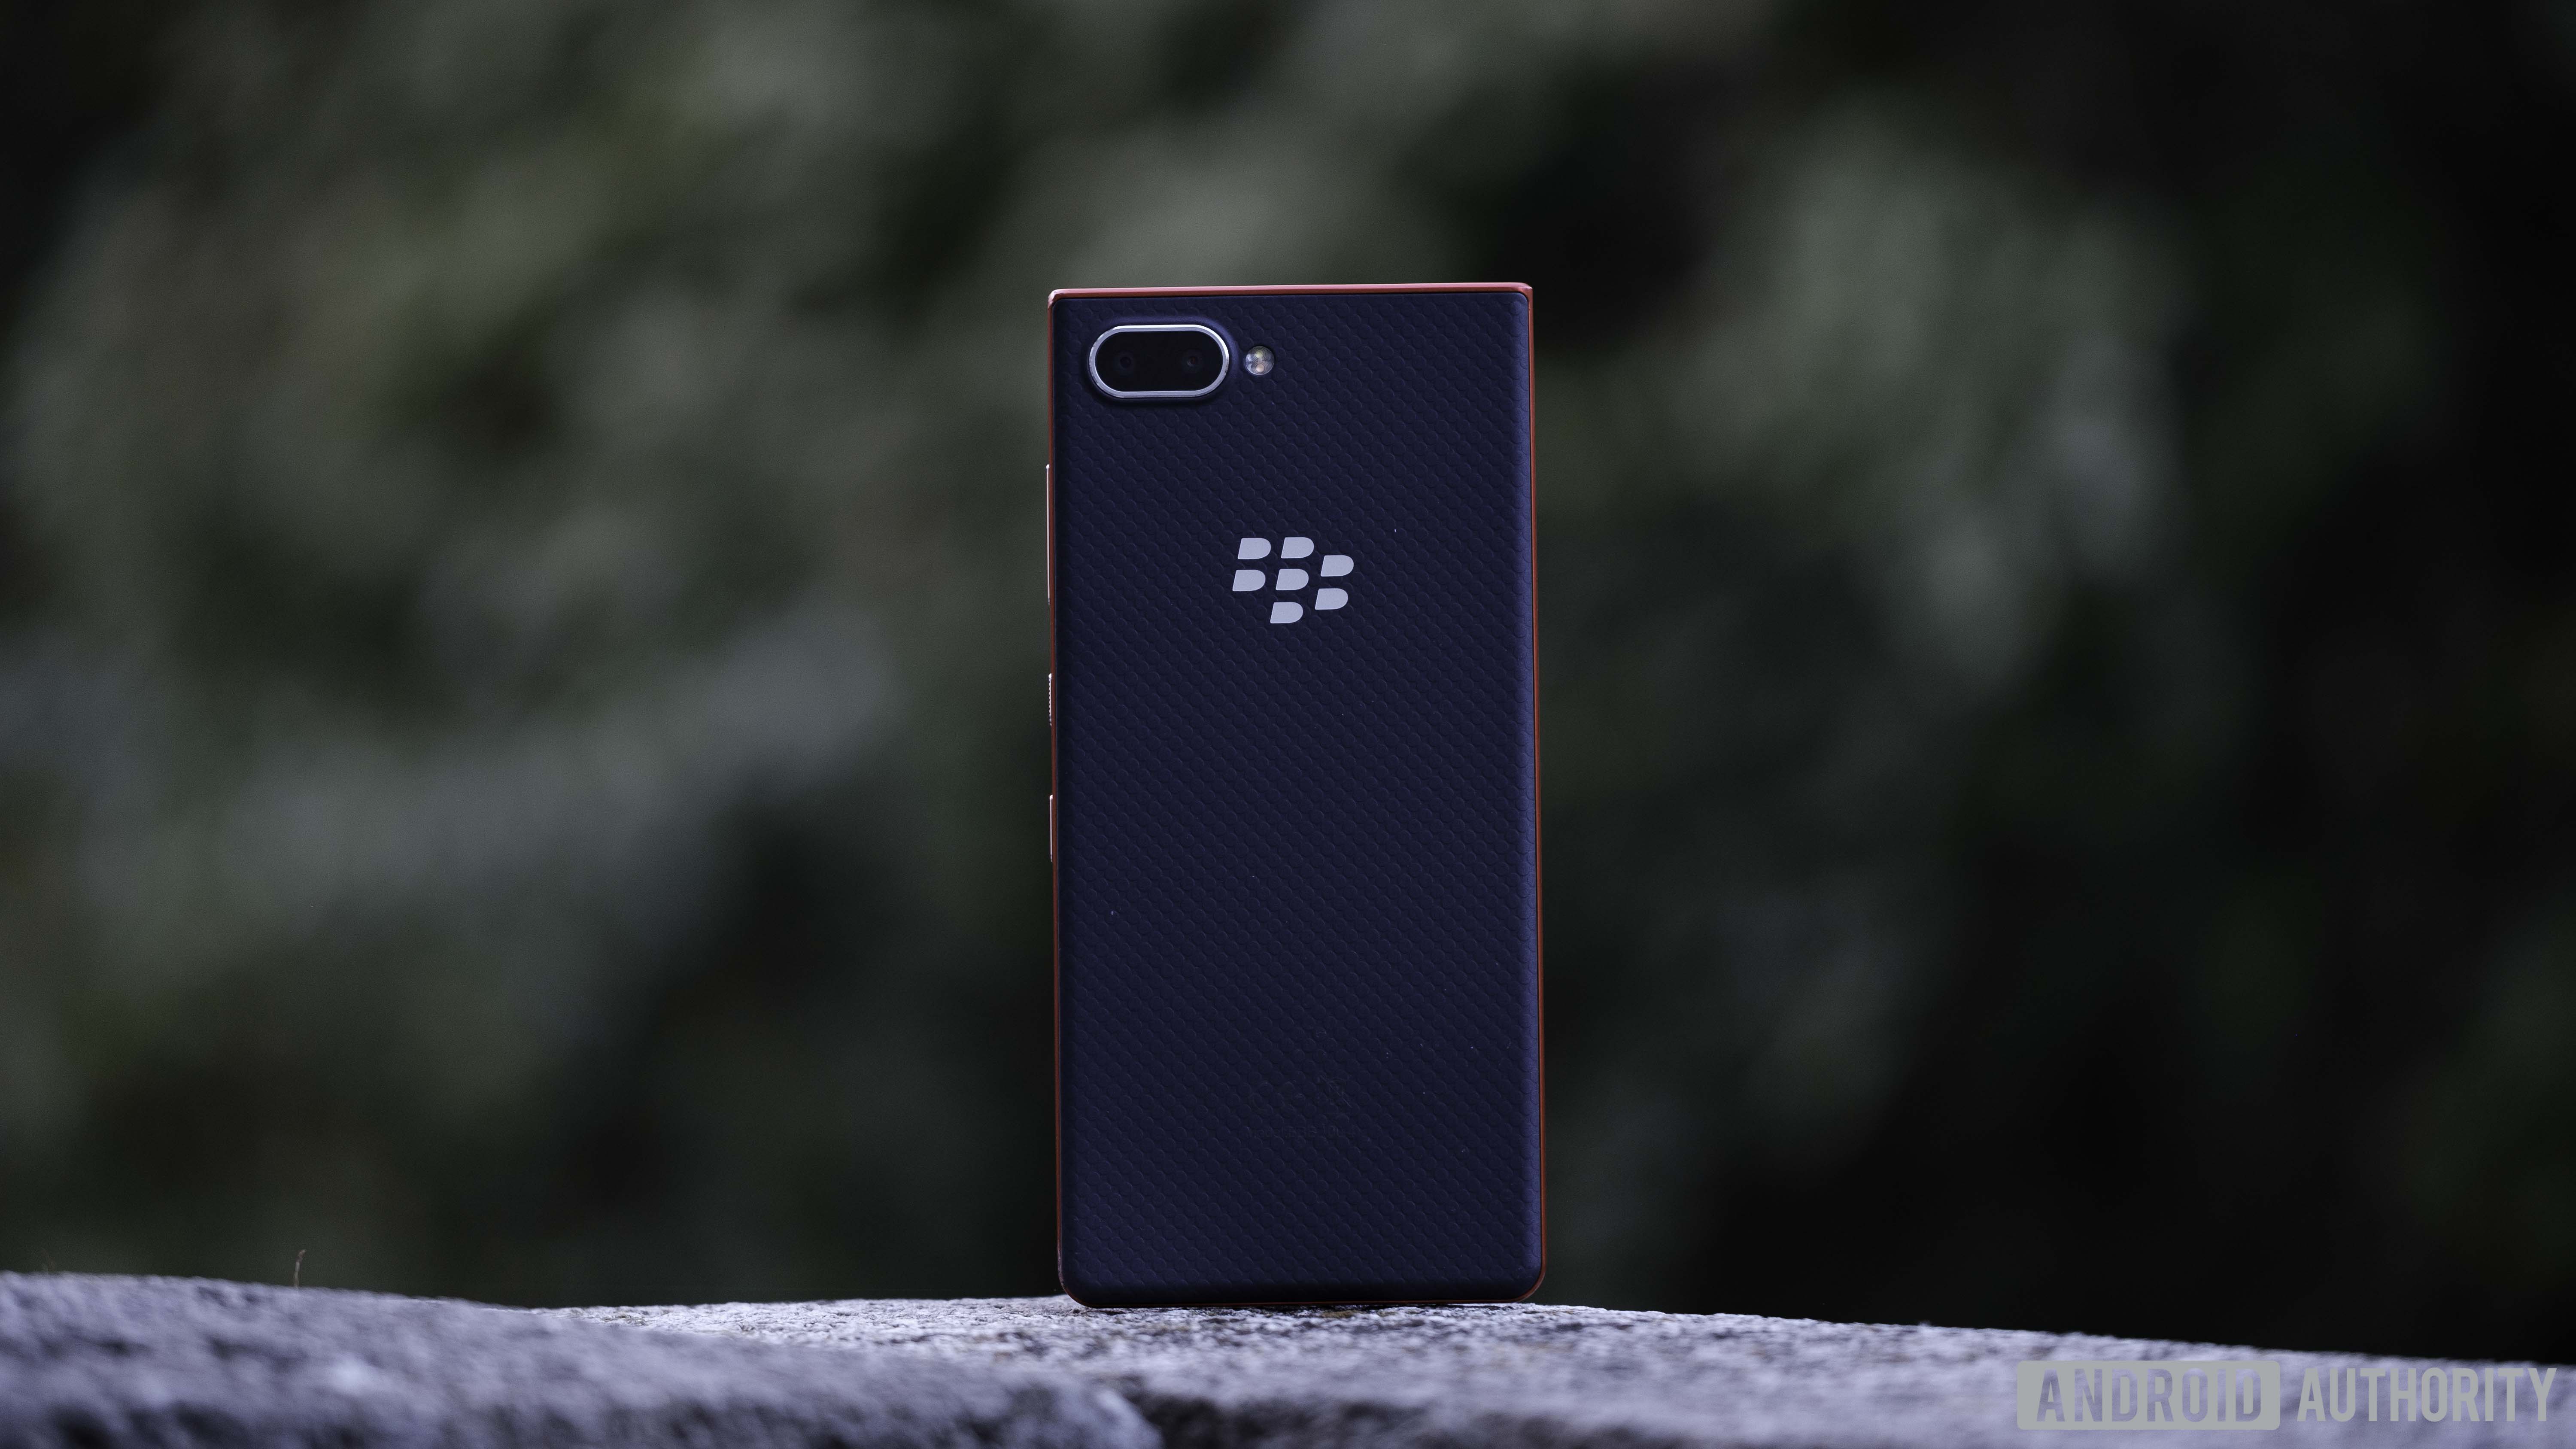 Blackberry Key2 LE atomic color showing the plush back, dual cameras, and Blackberry logo